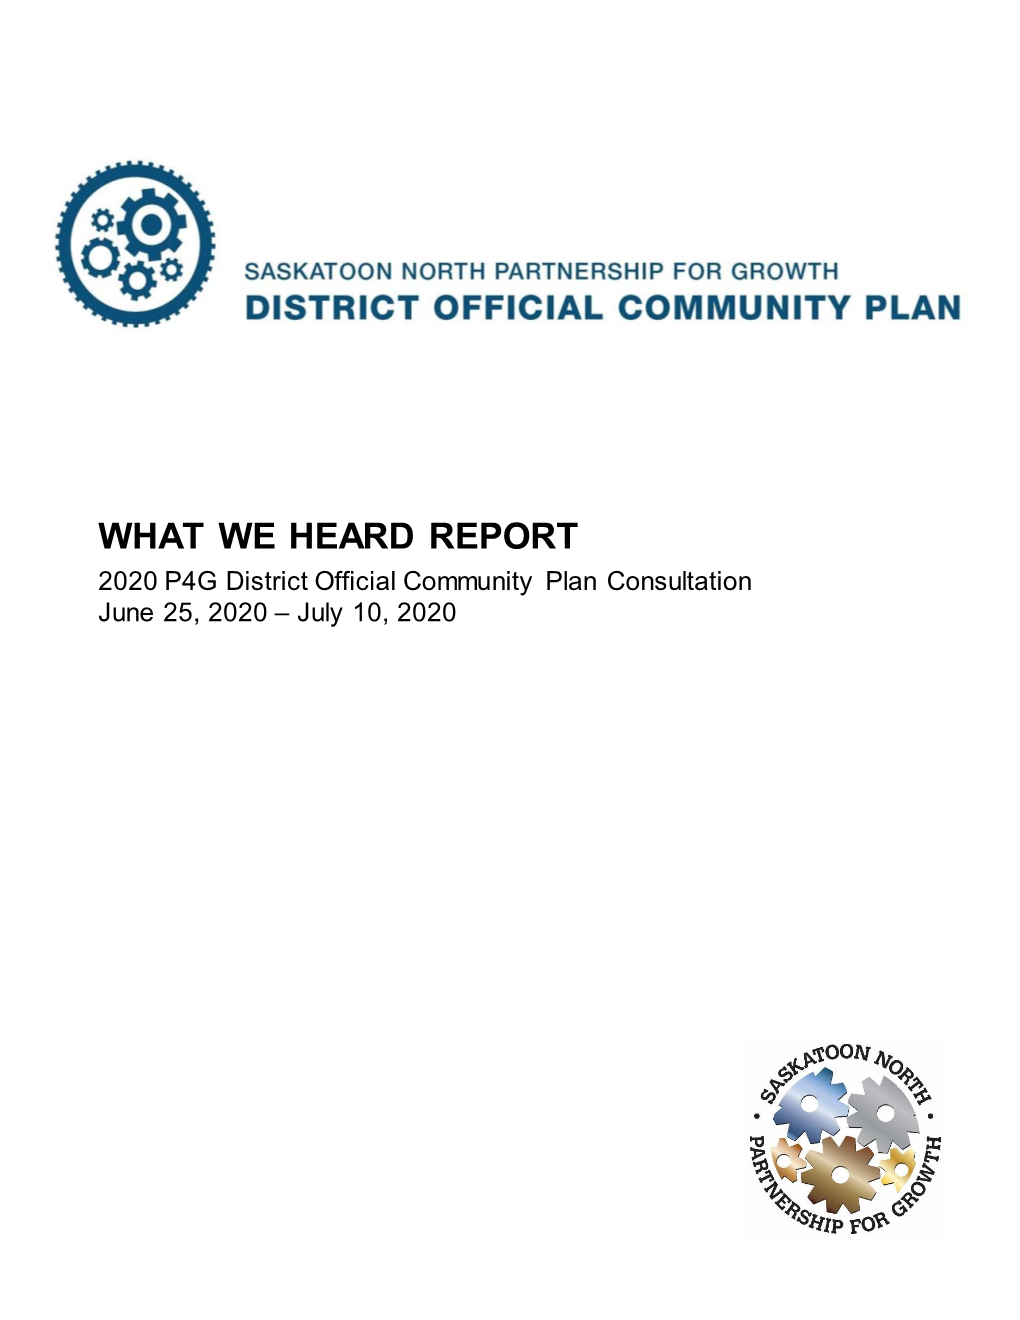 WHAT WE HEARD REPORT 2020 P4G District Official Community Plan Consultation June 25, 2020 – July 10, 2020